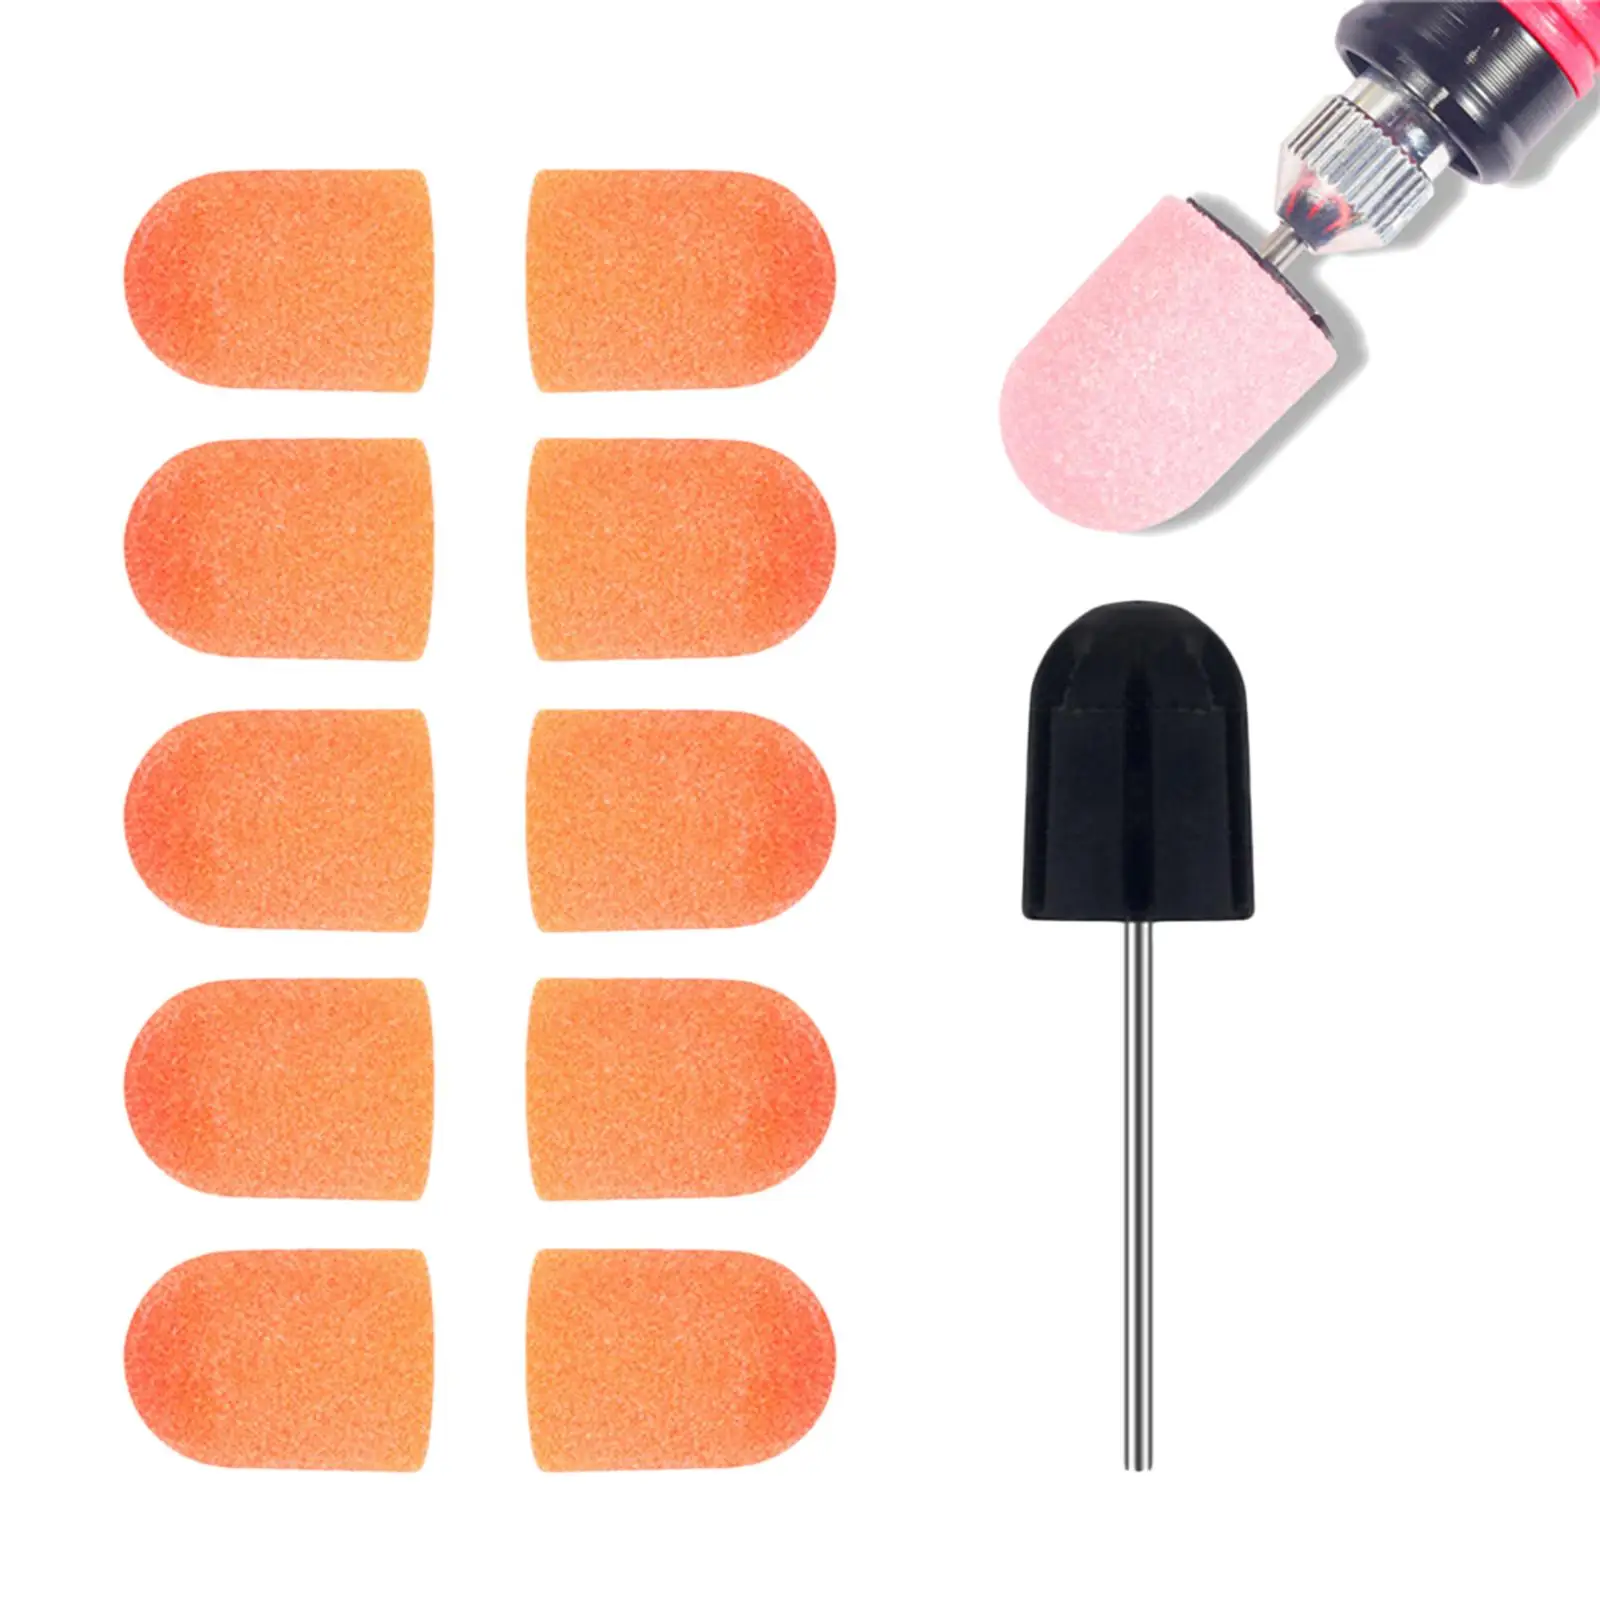 Nail Sanding Caps Bands Manicure   Polisher for Home Use Remover